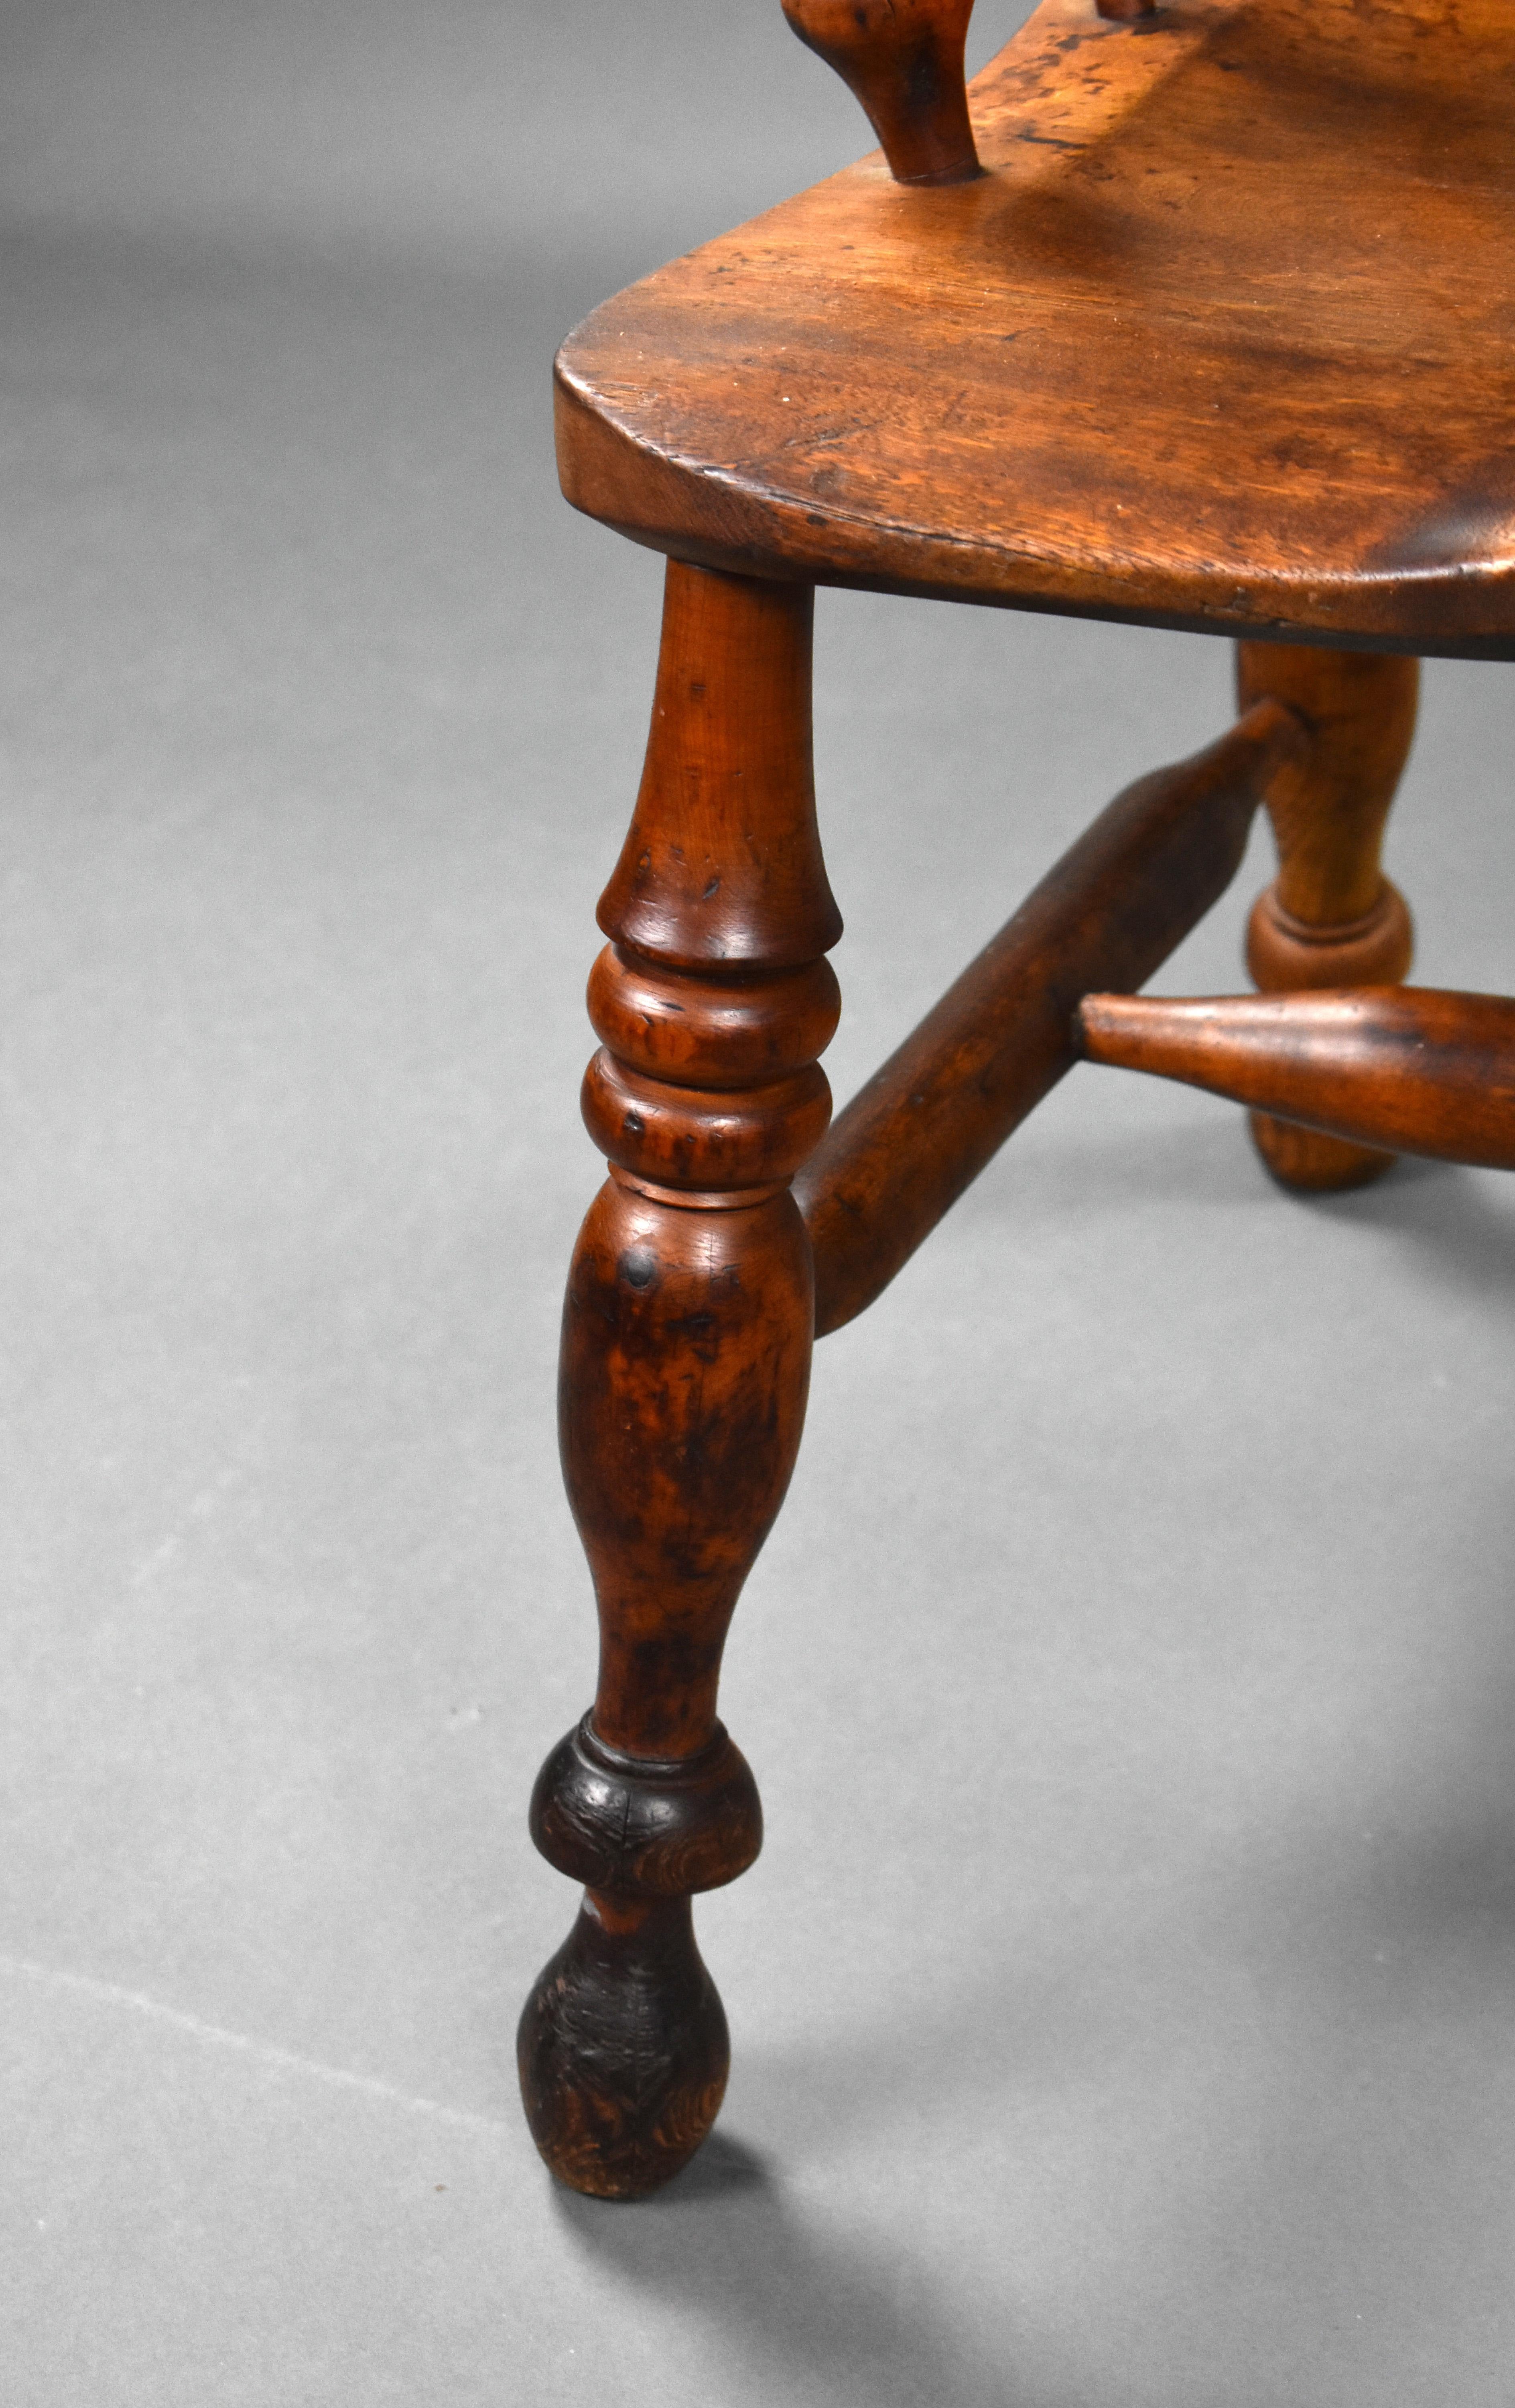 19th Century English Yew Wood High Back Broad Arm Windsor Chair For Sale 6